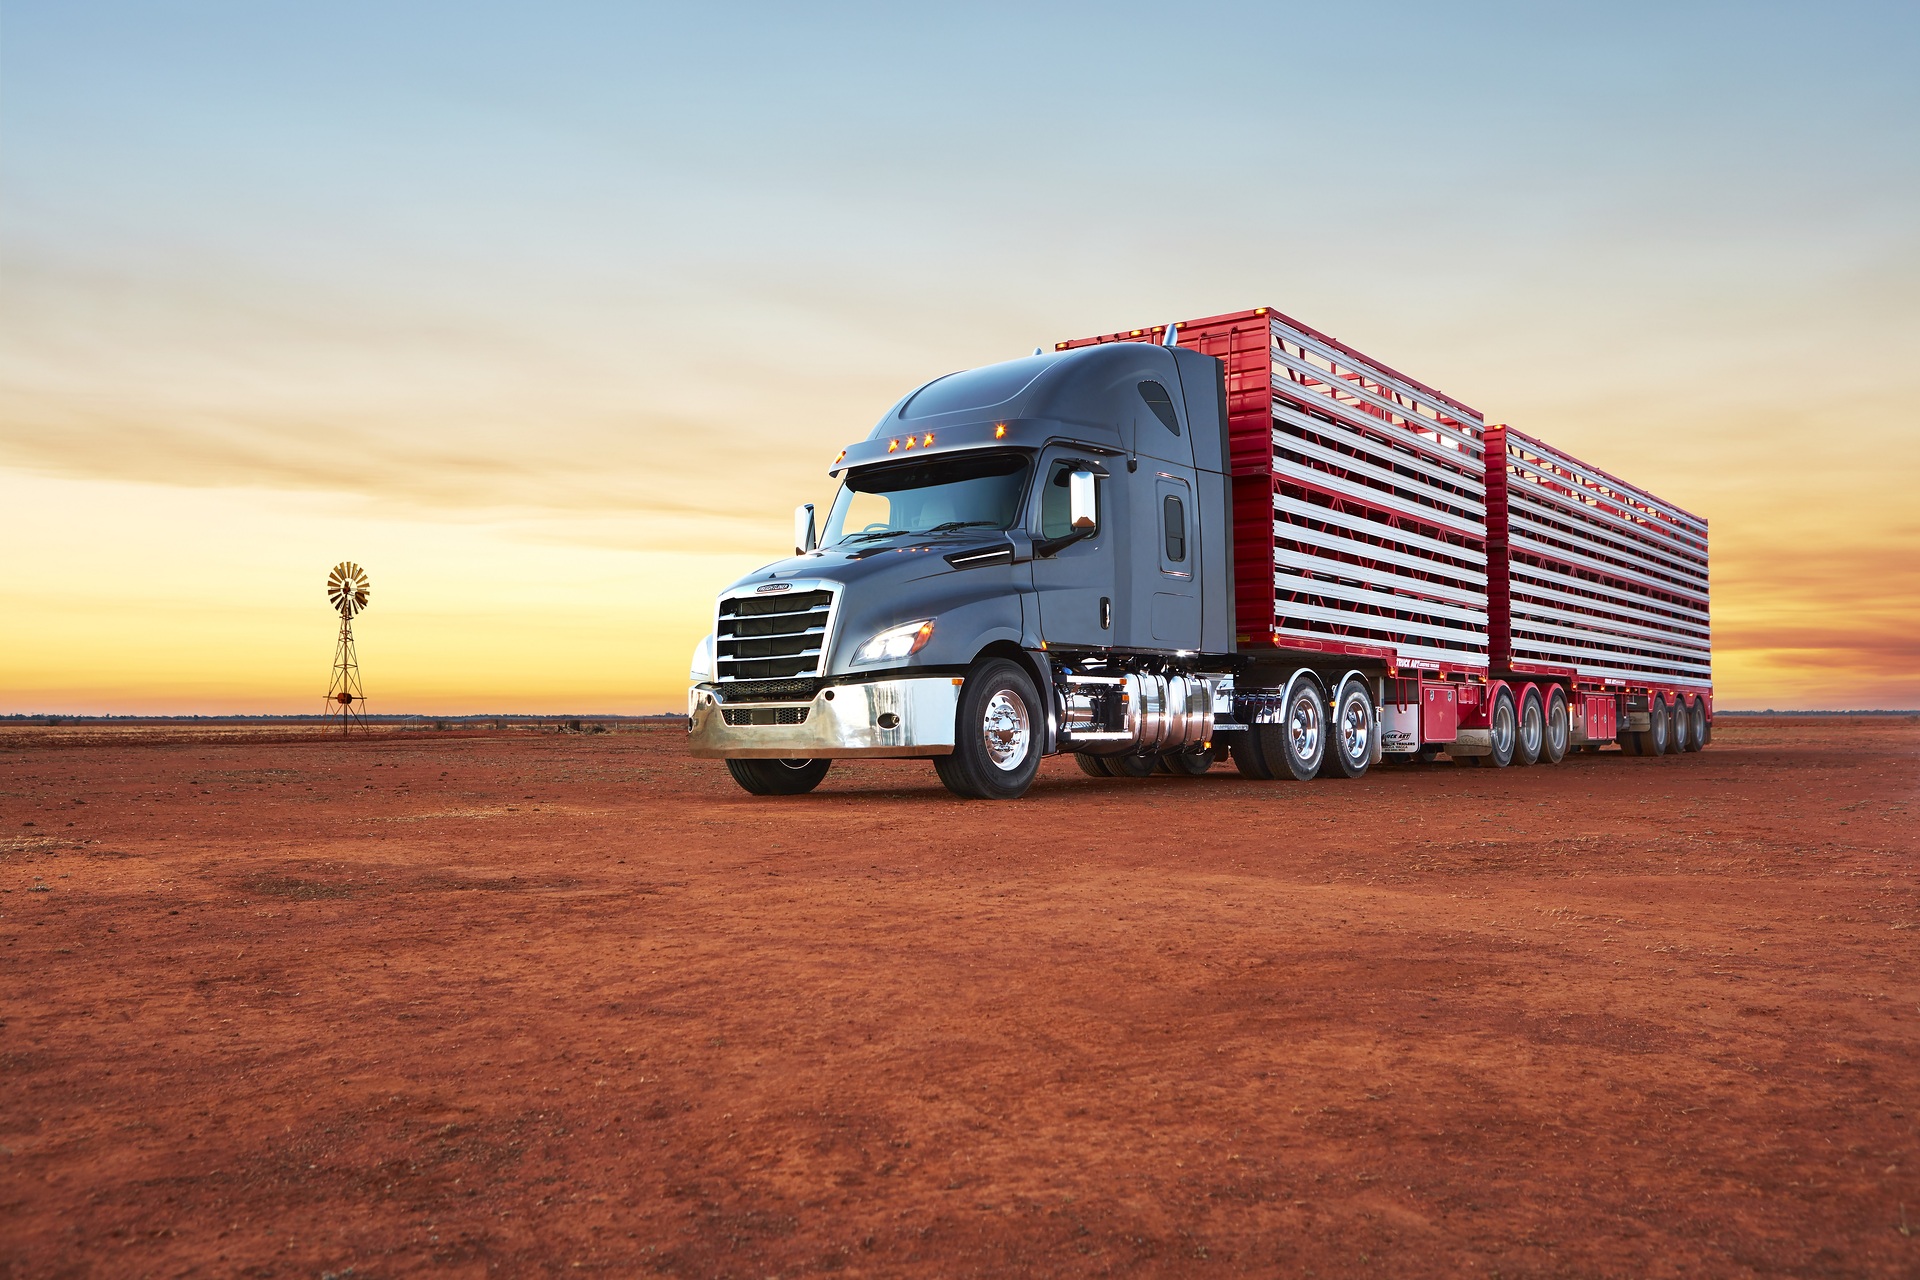 American truck for down-under: Daimler is bringing the new Freightliner Cascadia to Australia & New Zealand